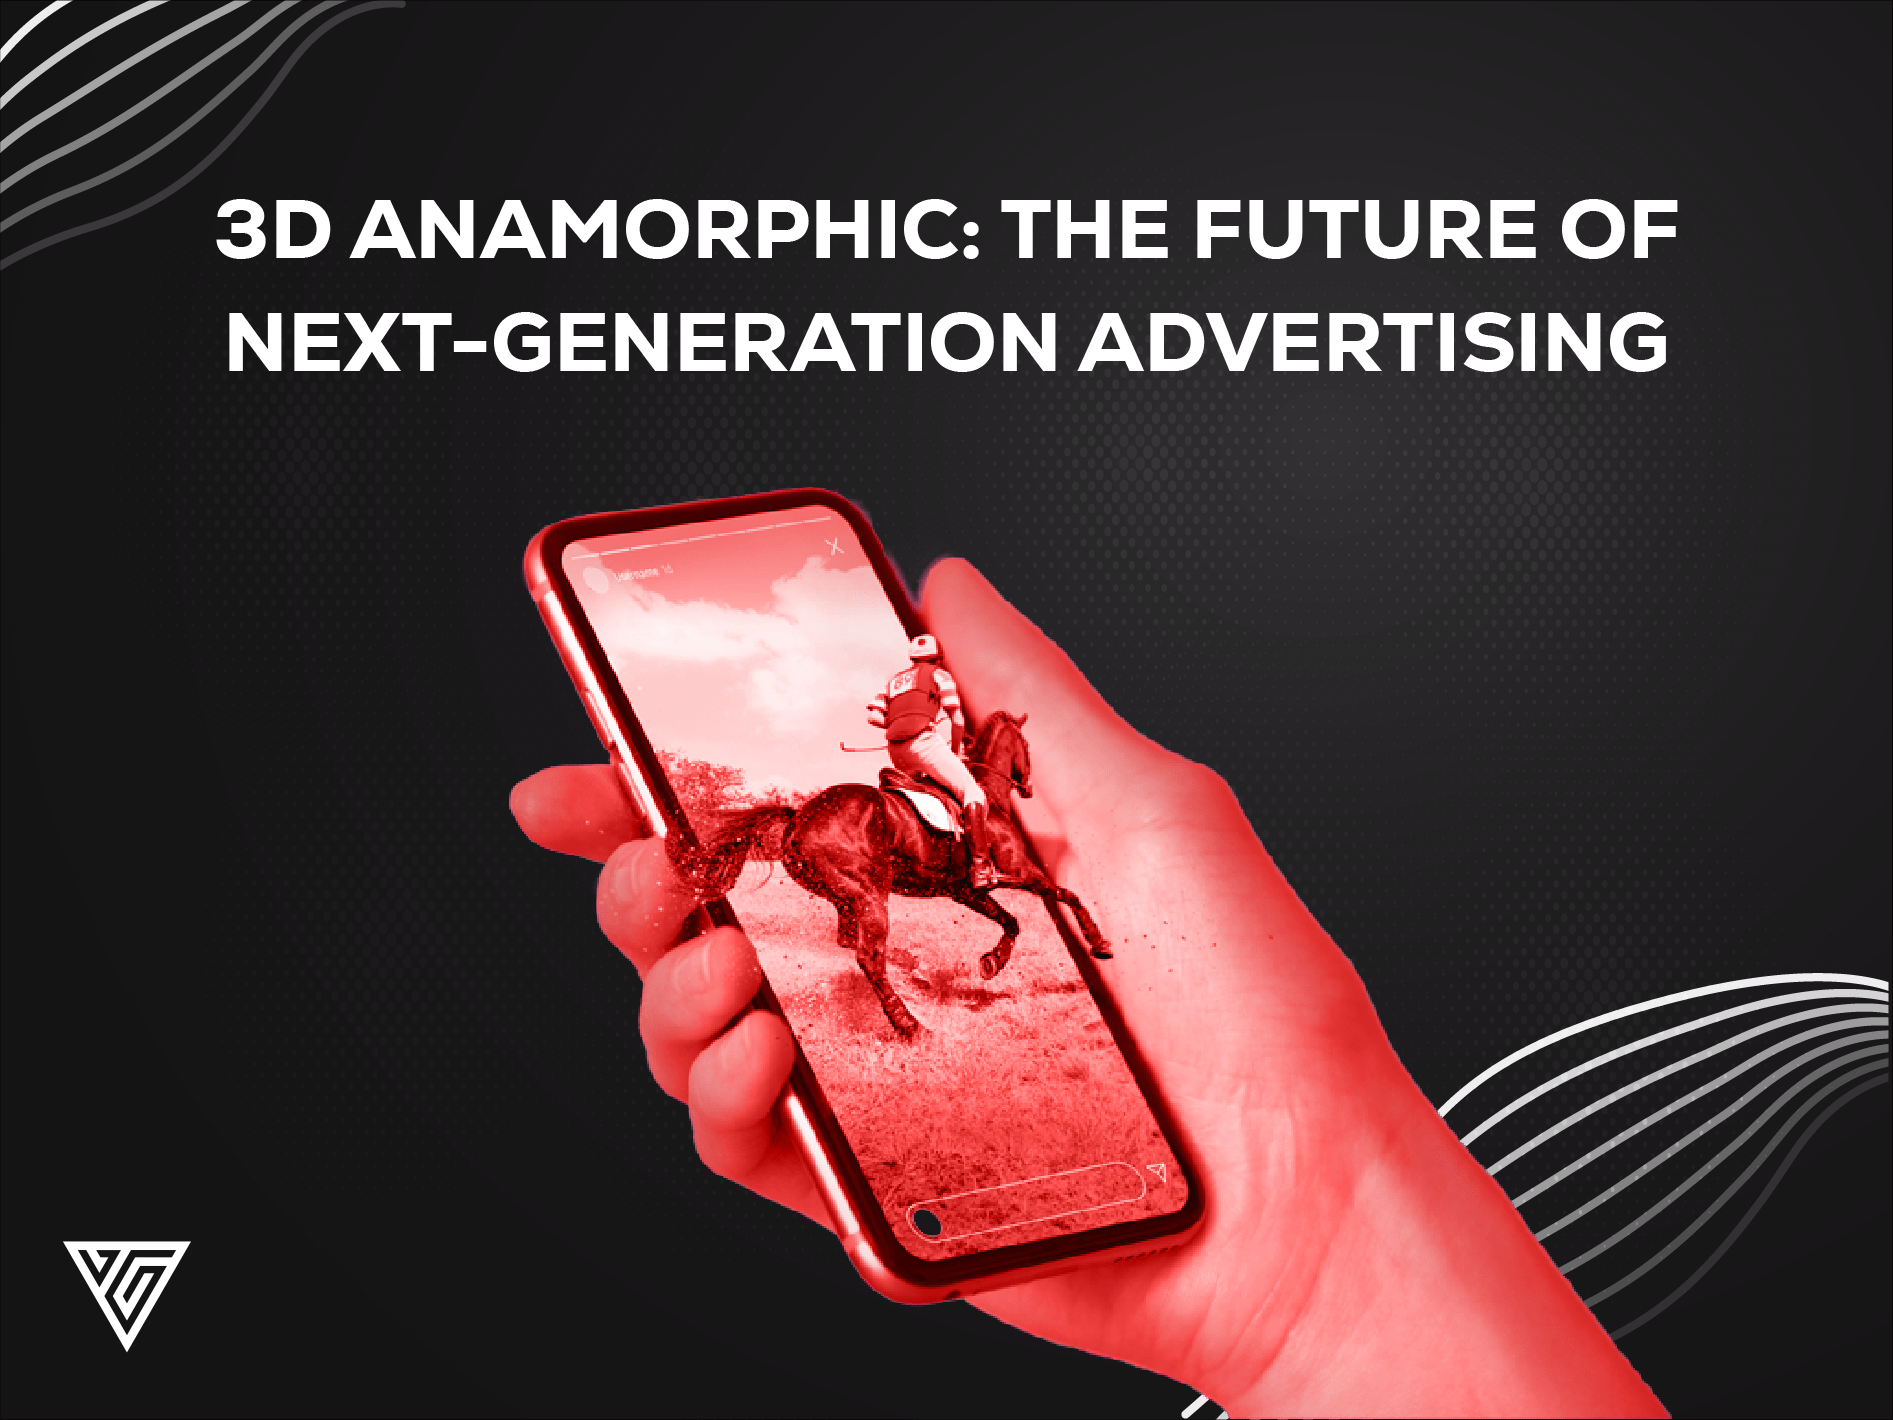 3D Anamorphic: The future of next-generation advertising VGenMedia